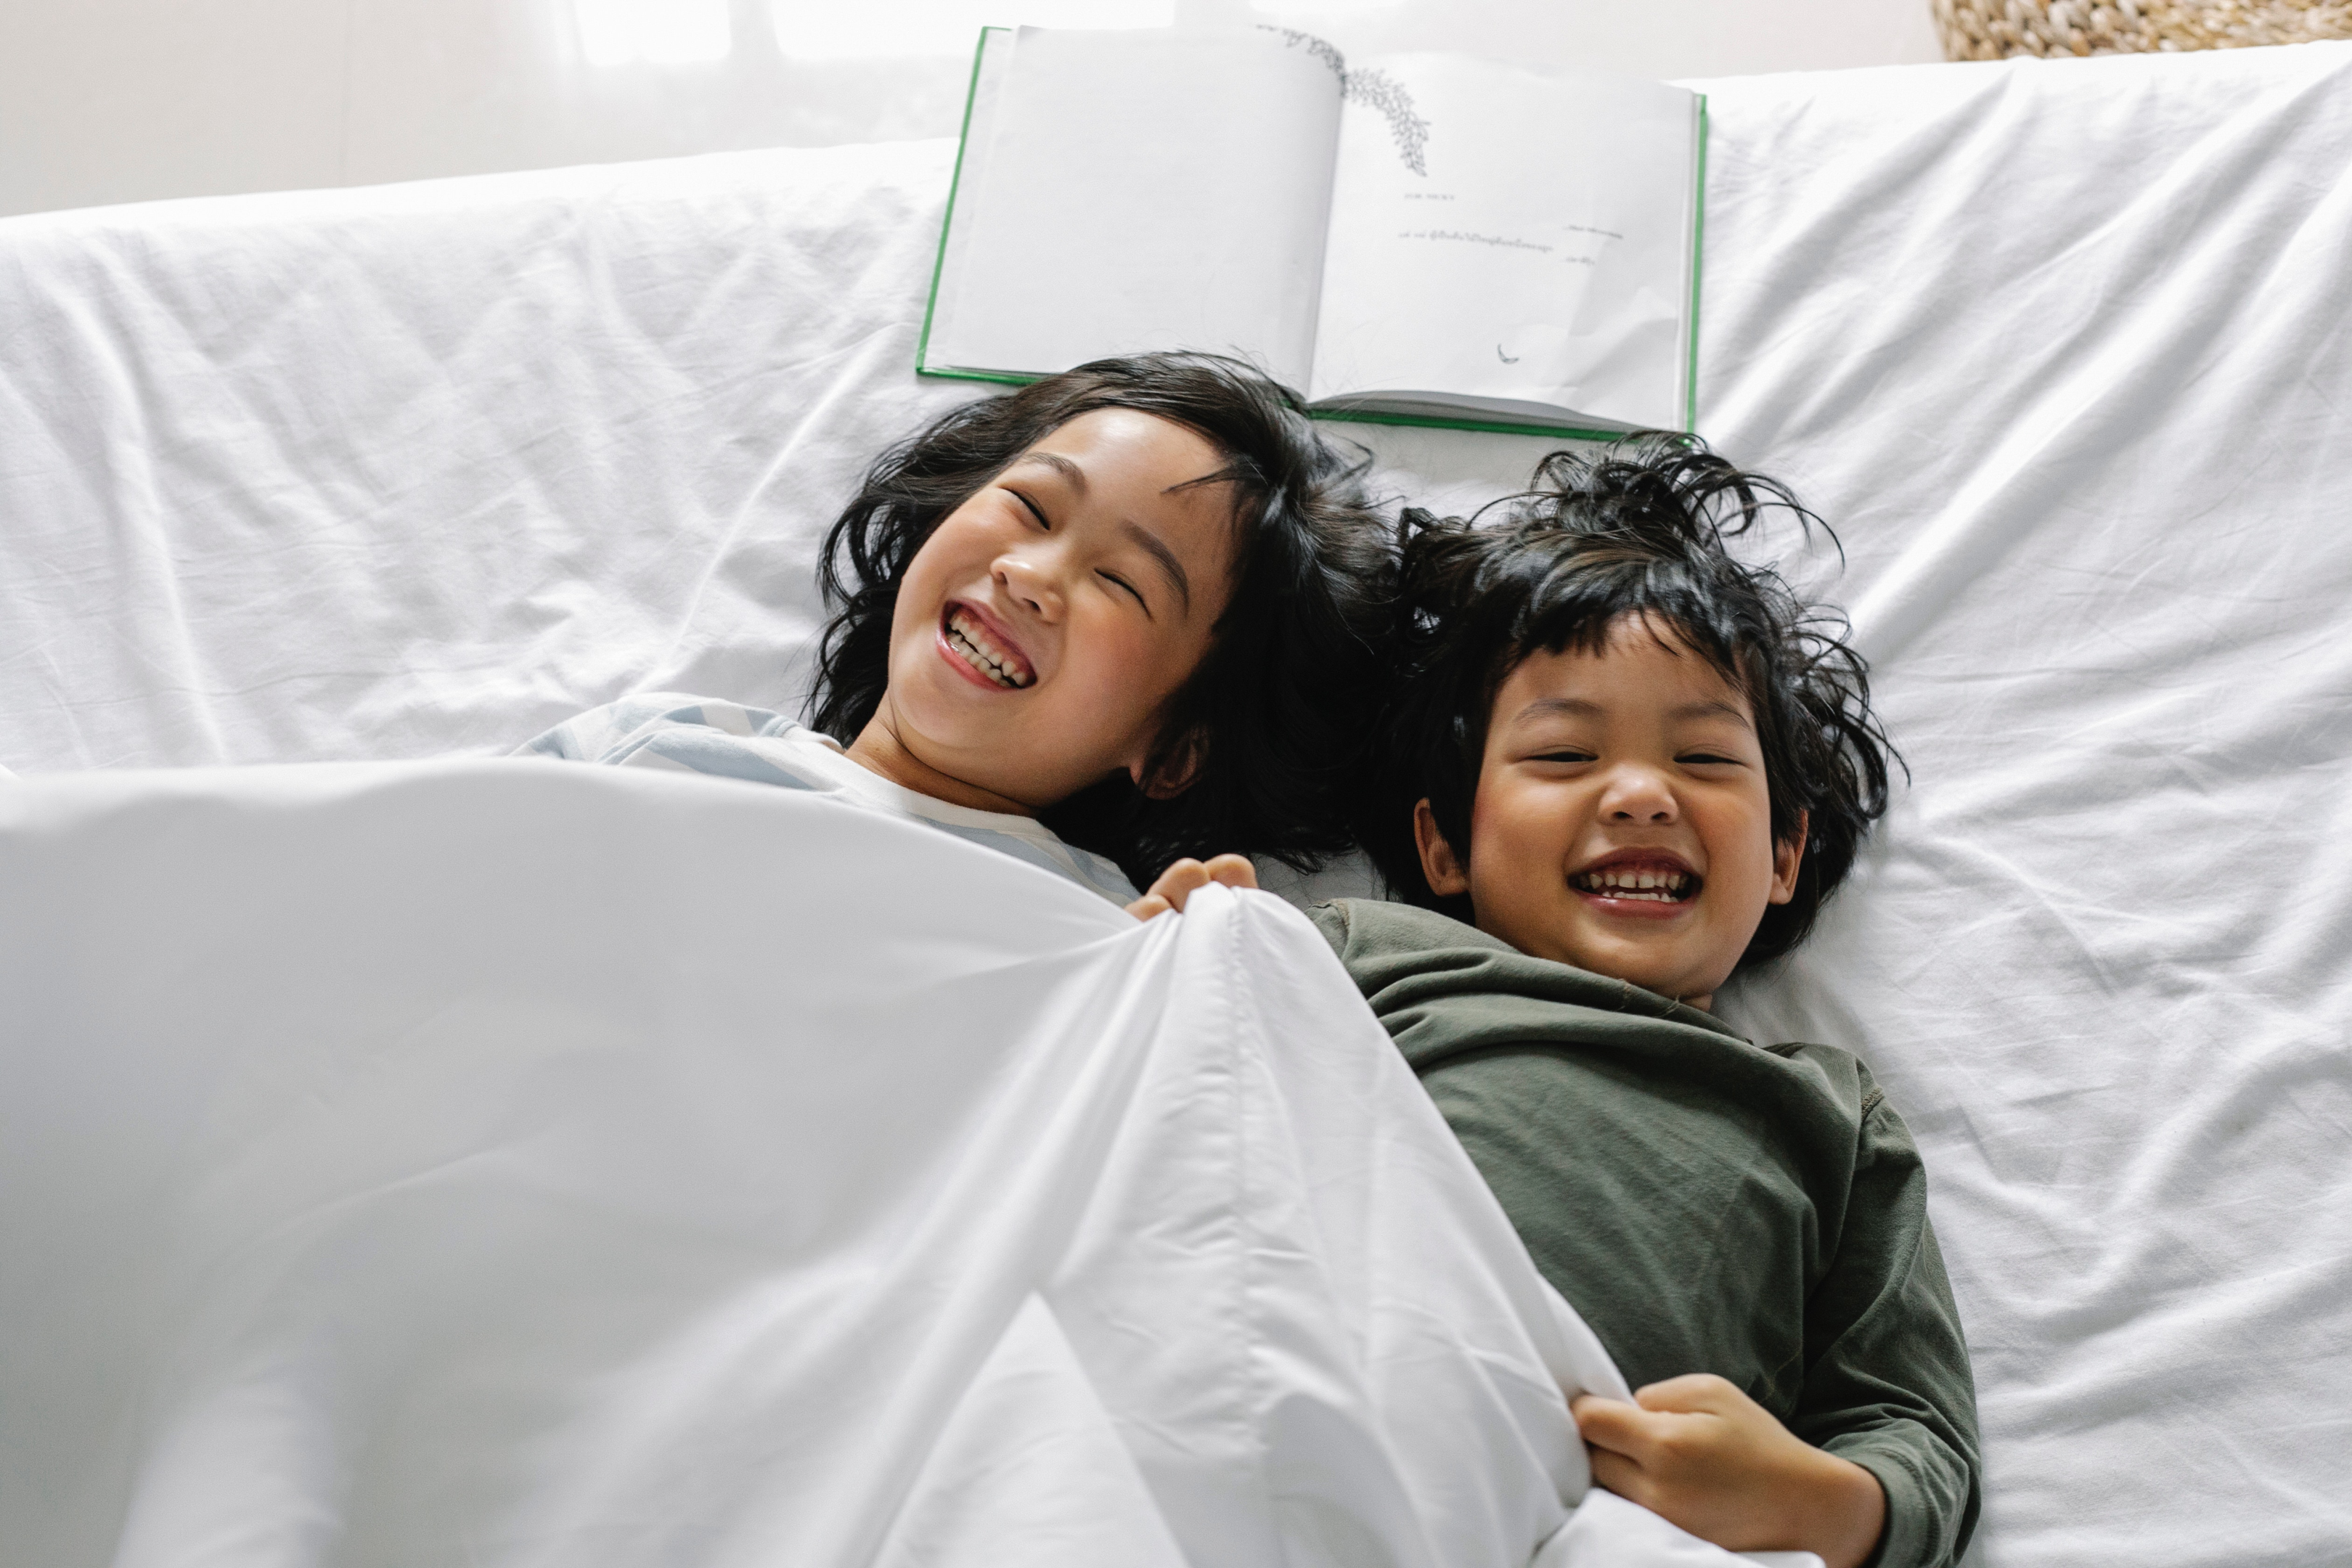 Children at Home | Photo by Alex Green from Pexels | https://www.pexels.com/photo/happy-ethnic-kids-having-fun-in-bed-5692254/